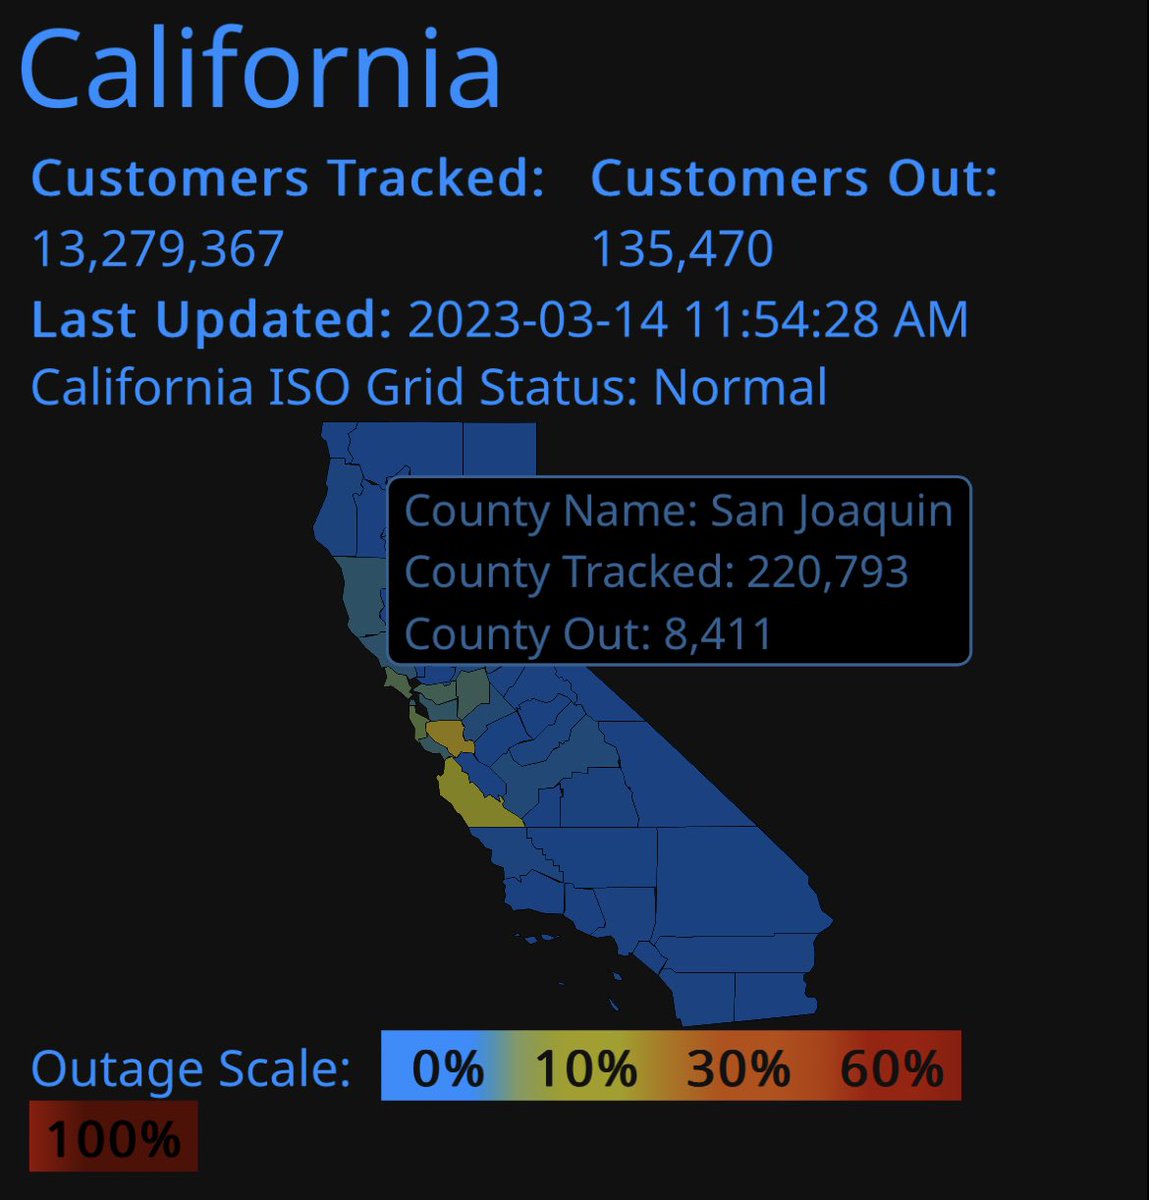 53 mph gust Sacramento Intl: 51 mph   Seeing outages increase, San Joaquin County has more than 8,000 customers without power